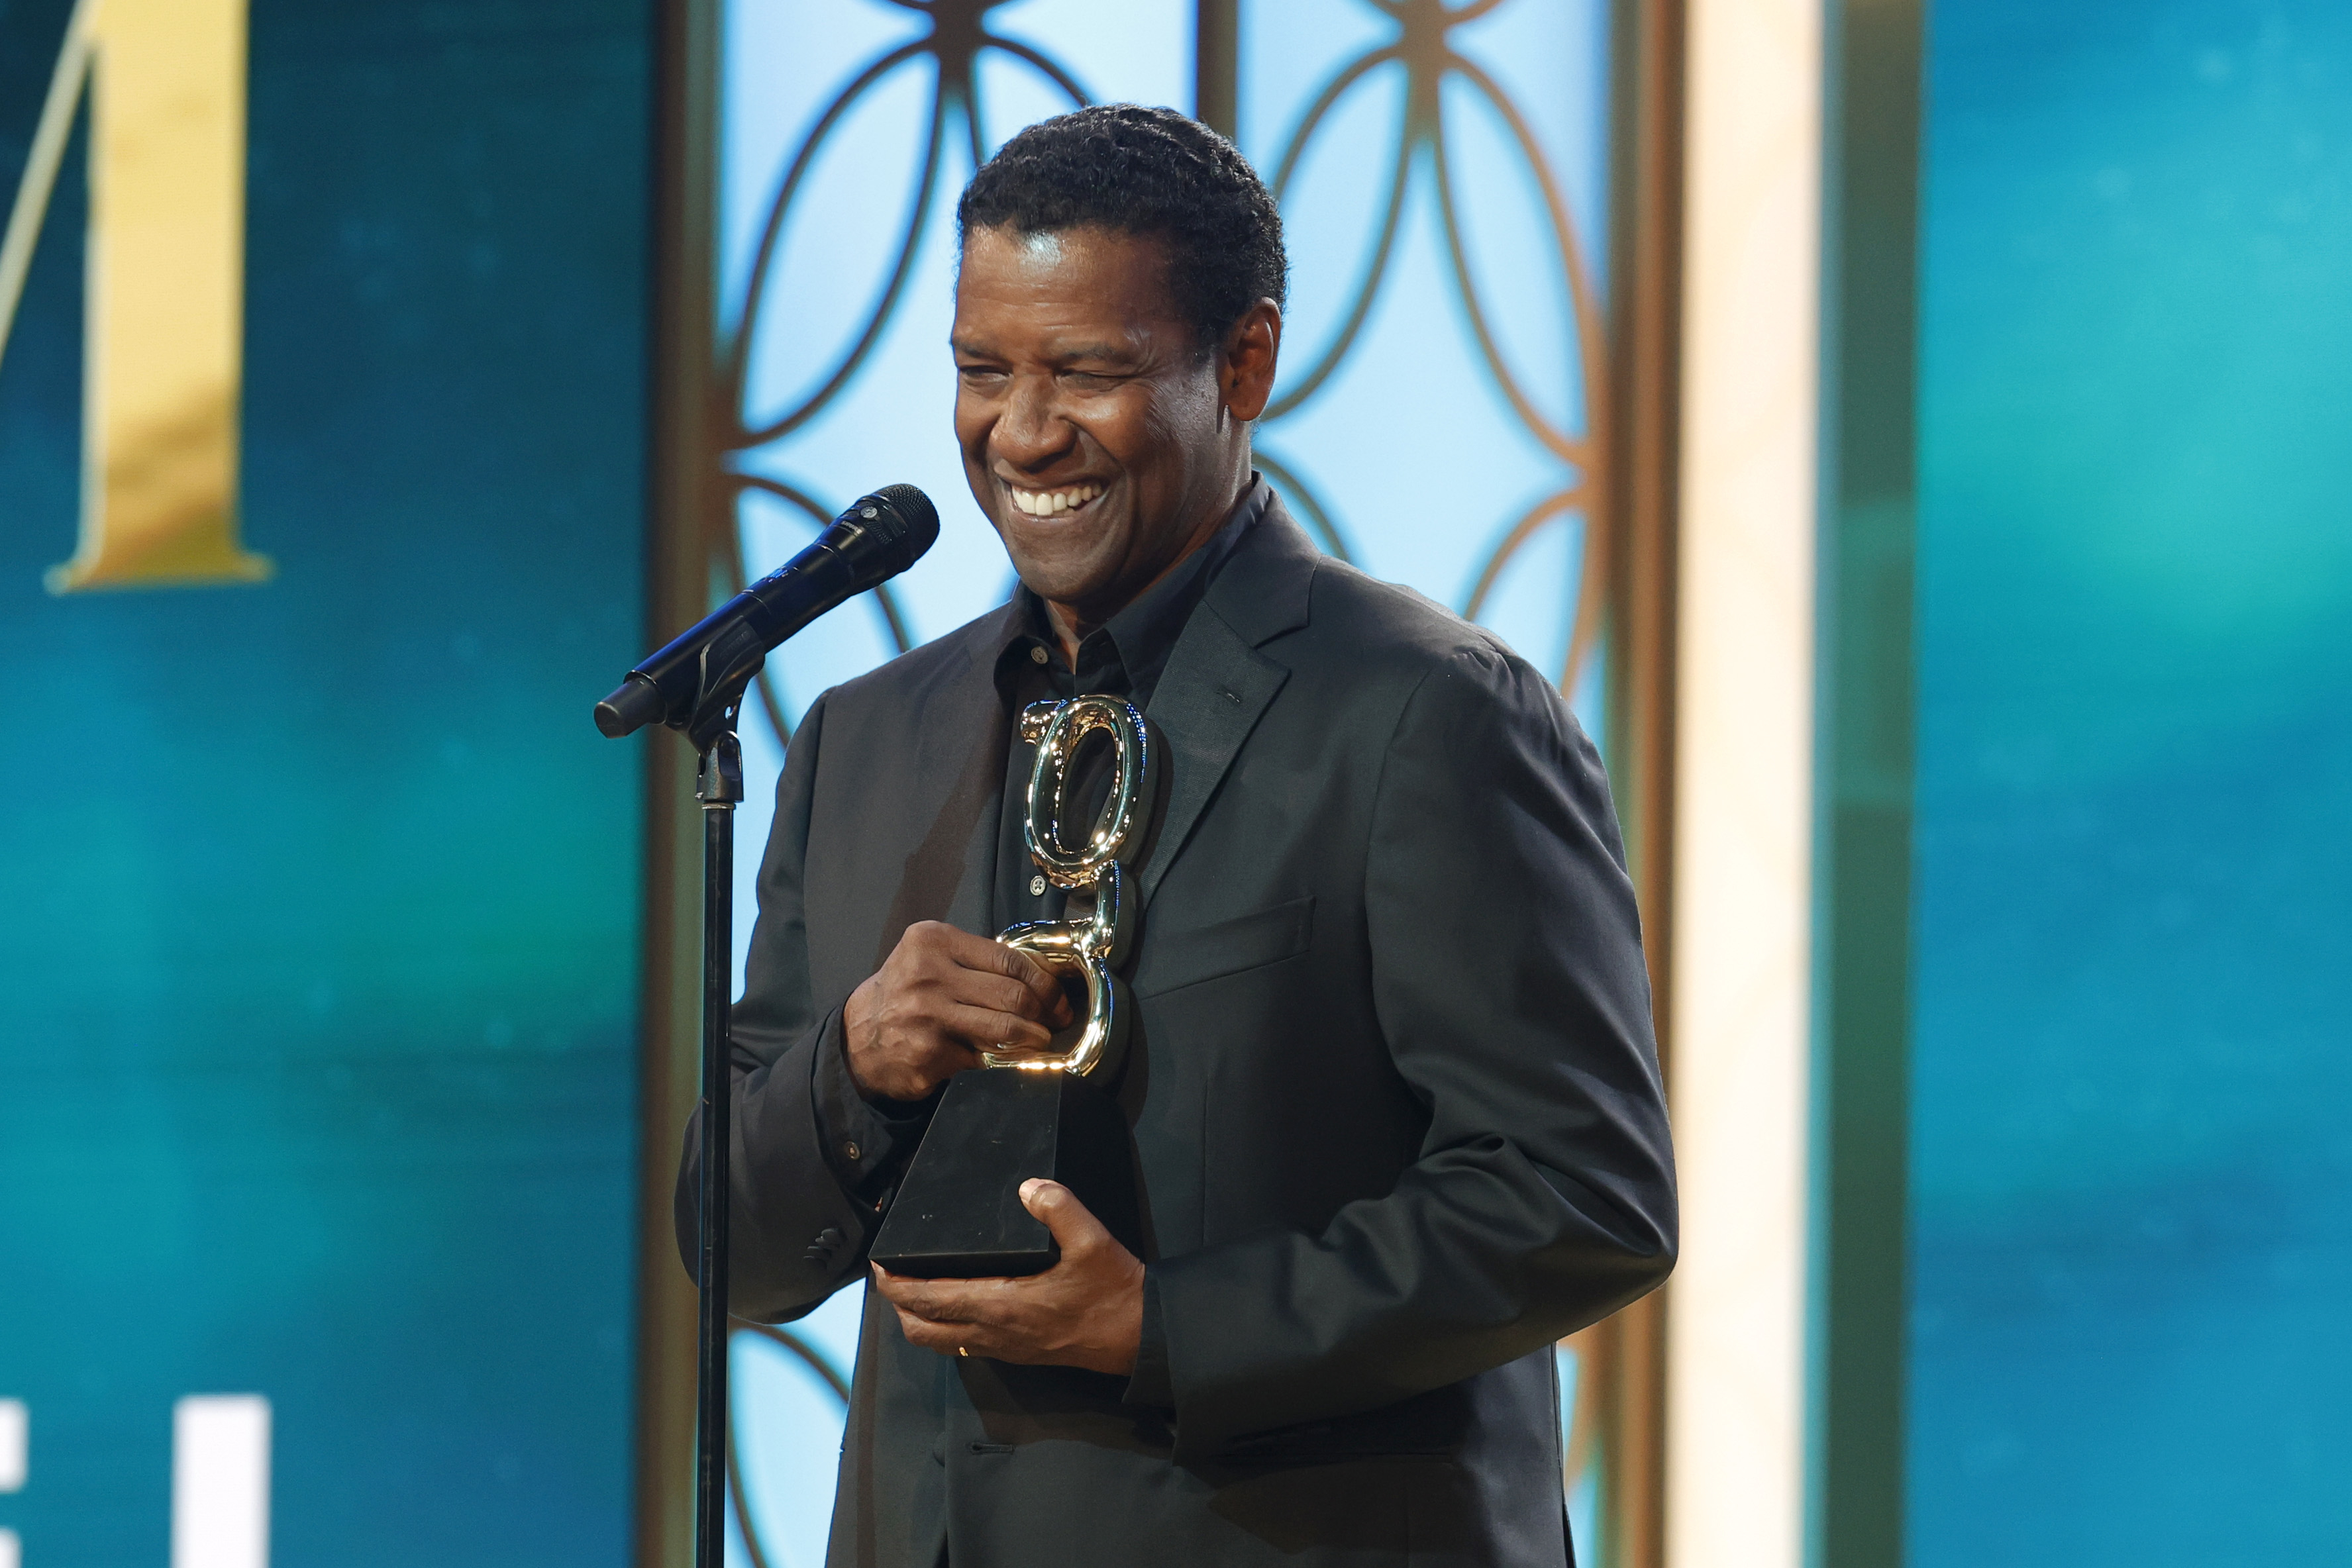 Denzel Washington smiling, holding a trophy at a podium with a microphone